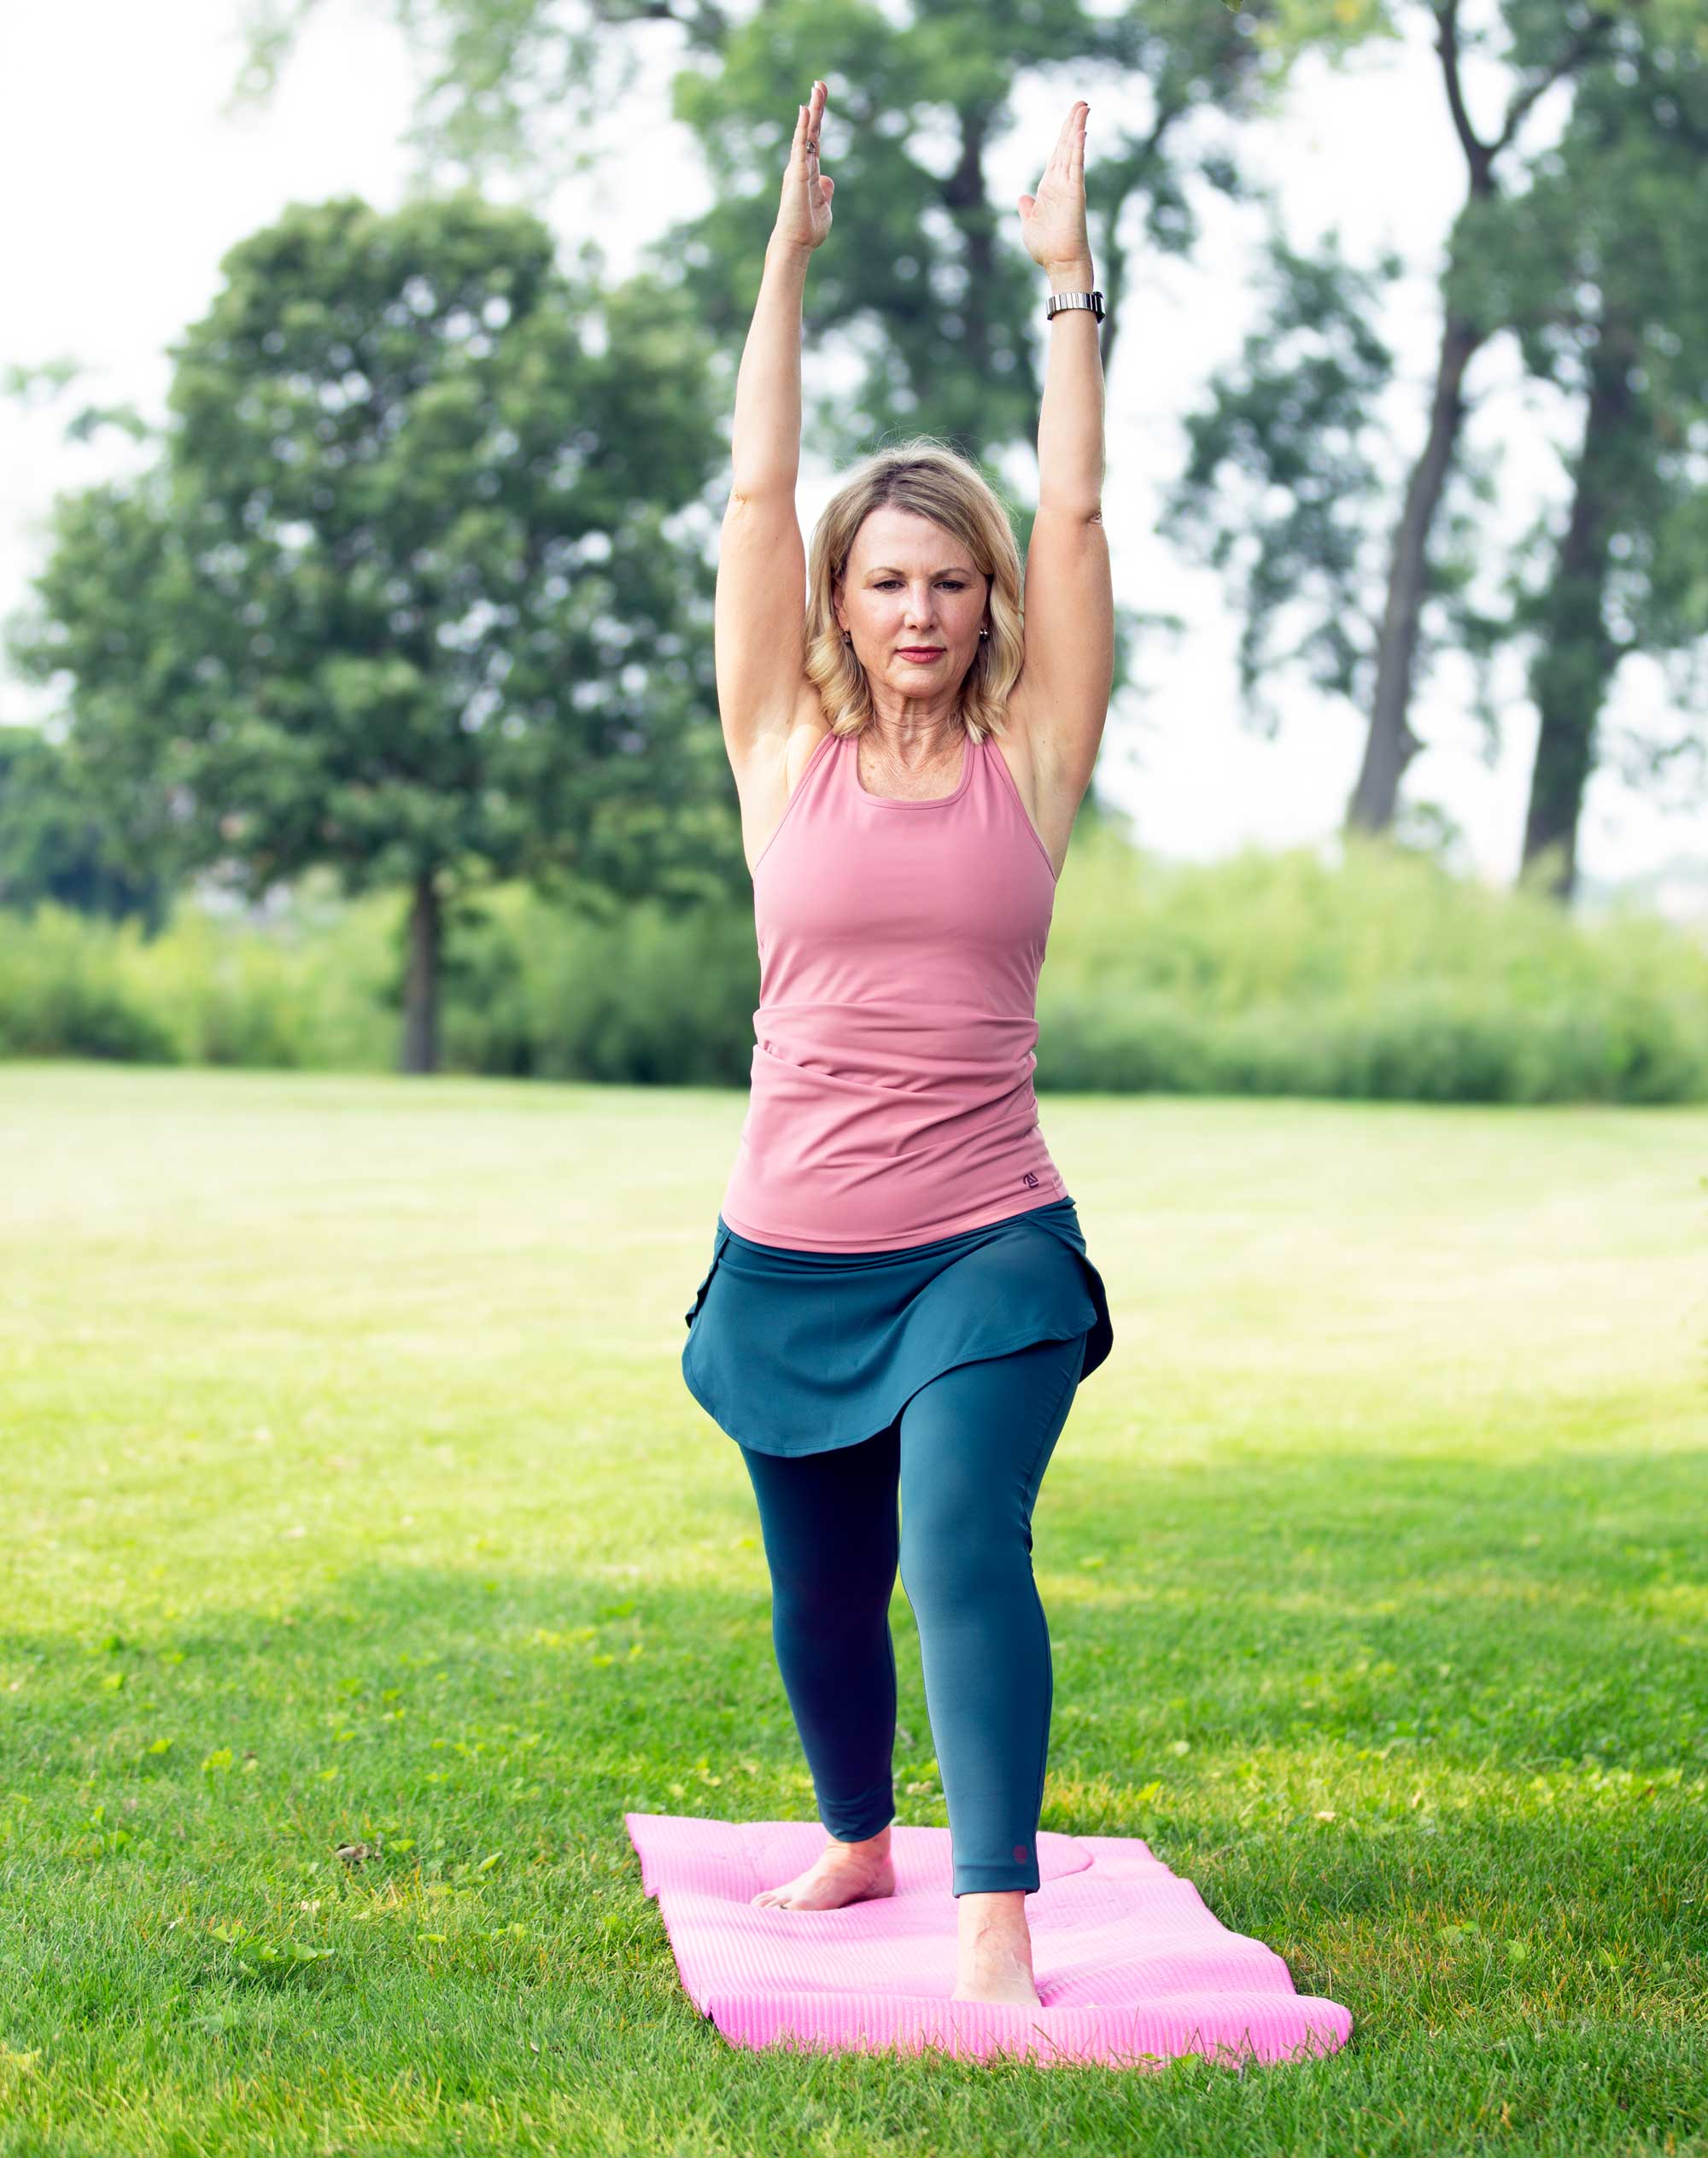 Yoga poses for weight loss for Beginners - Mobisium